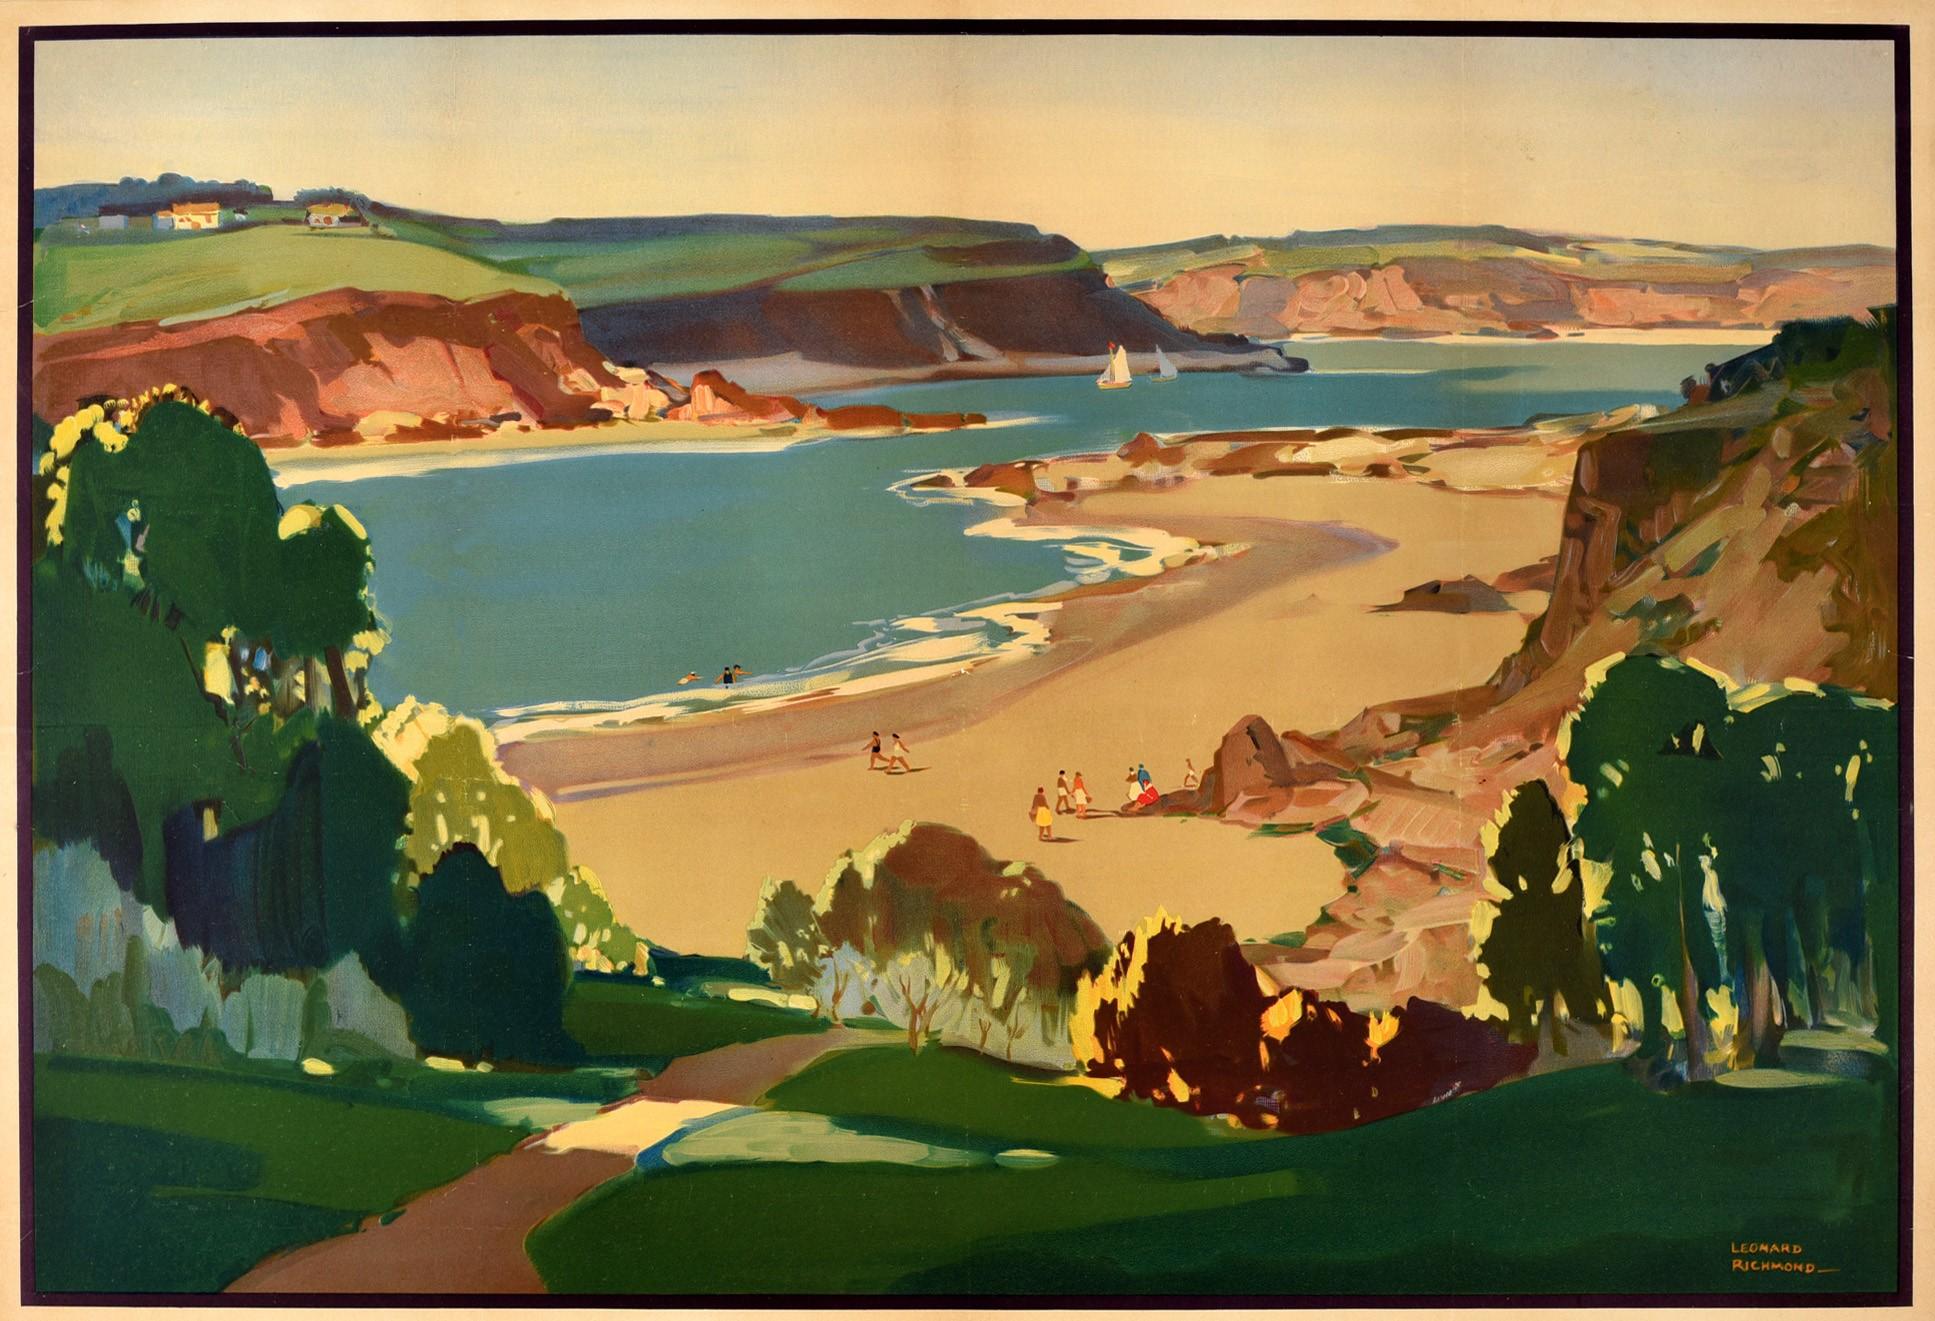 Original vintage travel poster for Glorious Devon issued by British Railways featuring a colourful country seaside scene by the artist and poster designer Leonard Richmond (1889-1965) depicting a tree lined pathway leading down to people walking